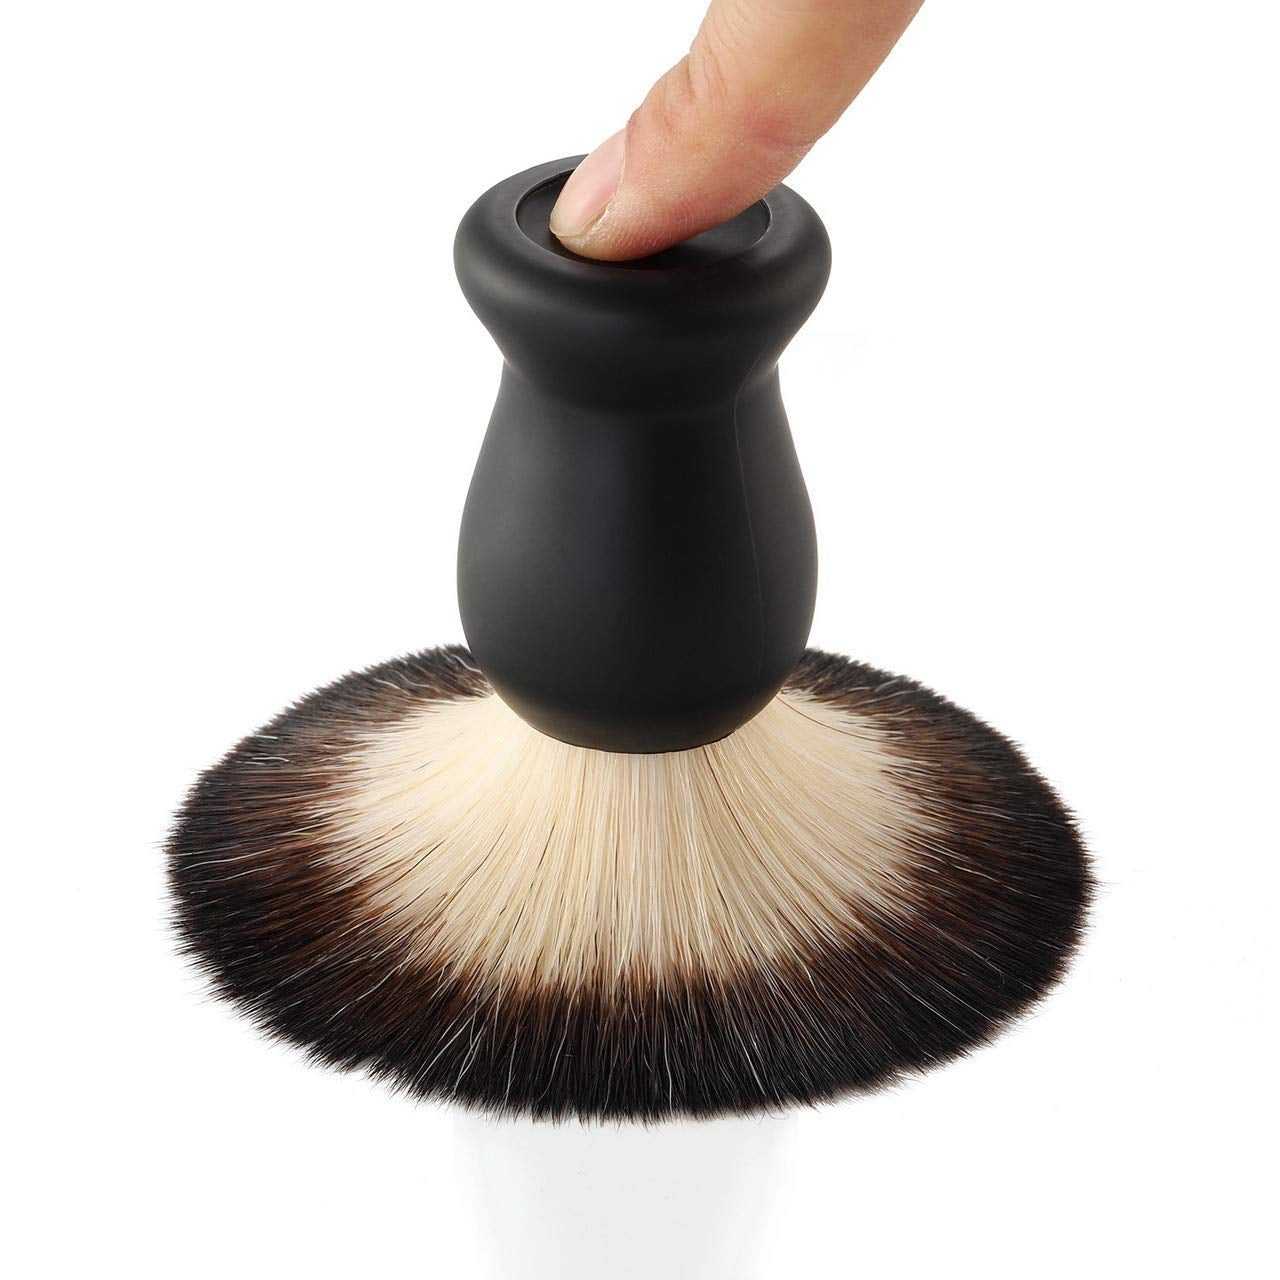 Shaving Brush Set for Men, Hair Shaving Brush with Solid Wood Handle, and Dia 3.1 Inches Stainless Steel Shaving Bowl, Shaving Stand for Wet Shaving